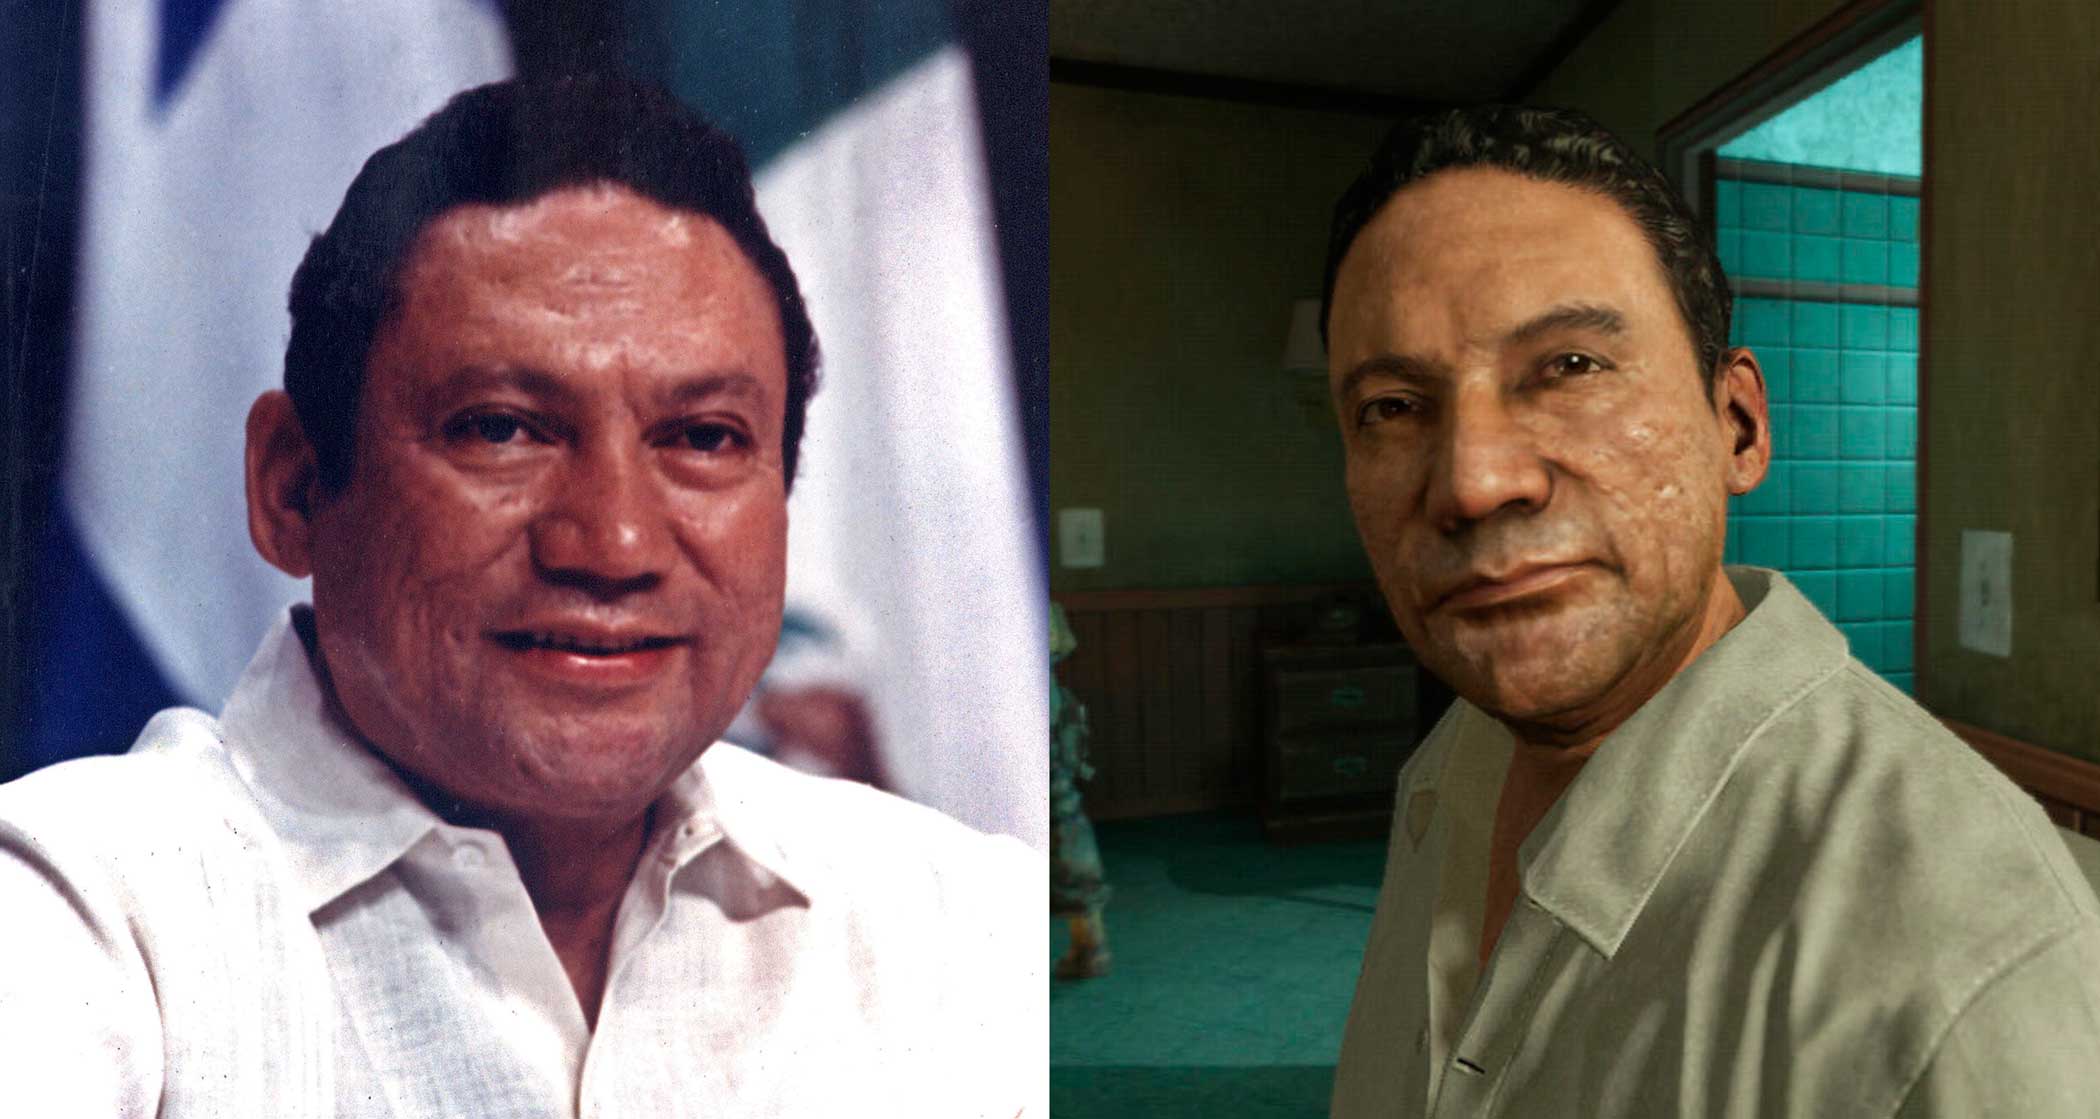 (L) Panamanian strongman Manuel Antonio Noriega takes part in a news conference at the Atlapa center in Panama City on Oct. 11,1998.(R) The character Noriega claims was created in his likeness.